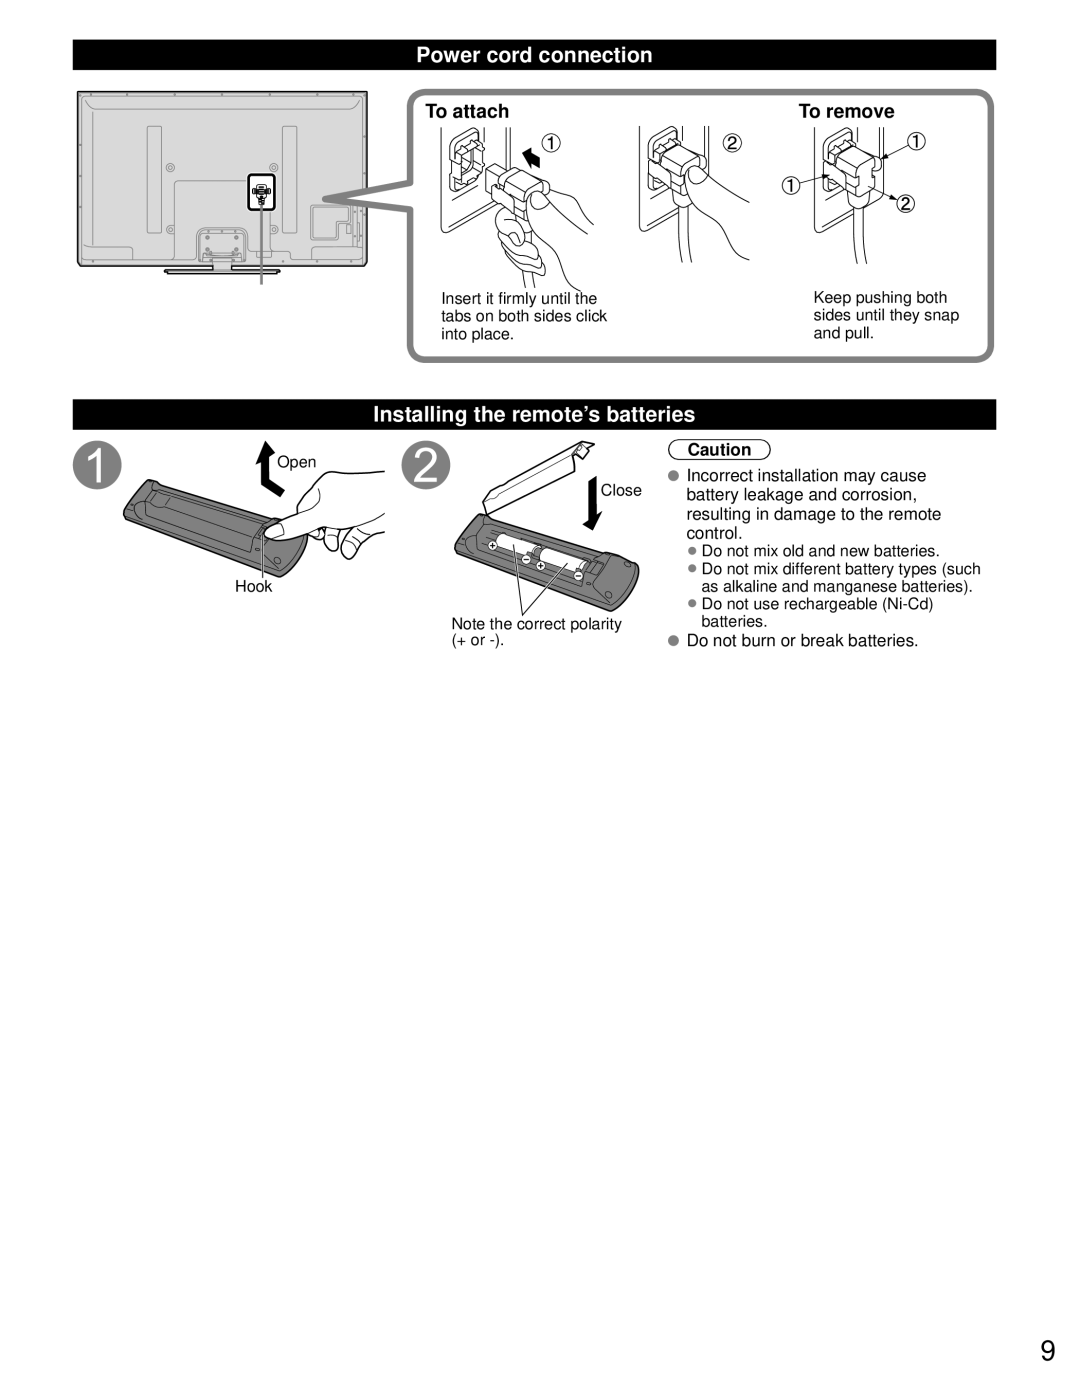 Panasonic TC-P60U50 owner manual Power cord connection, Installing the remote’s batteries, To attach, To remove 